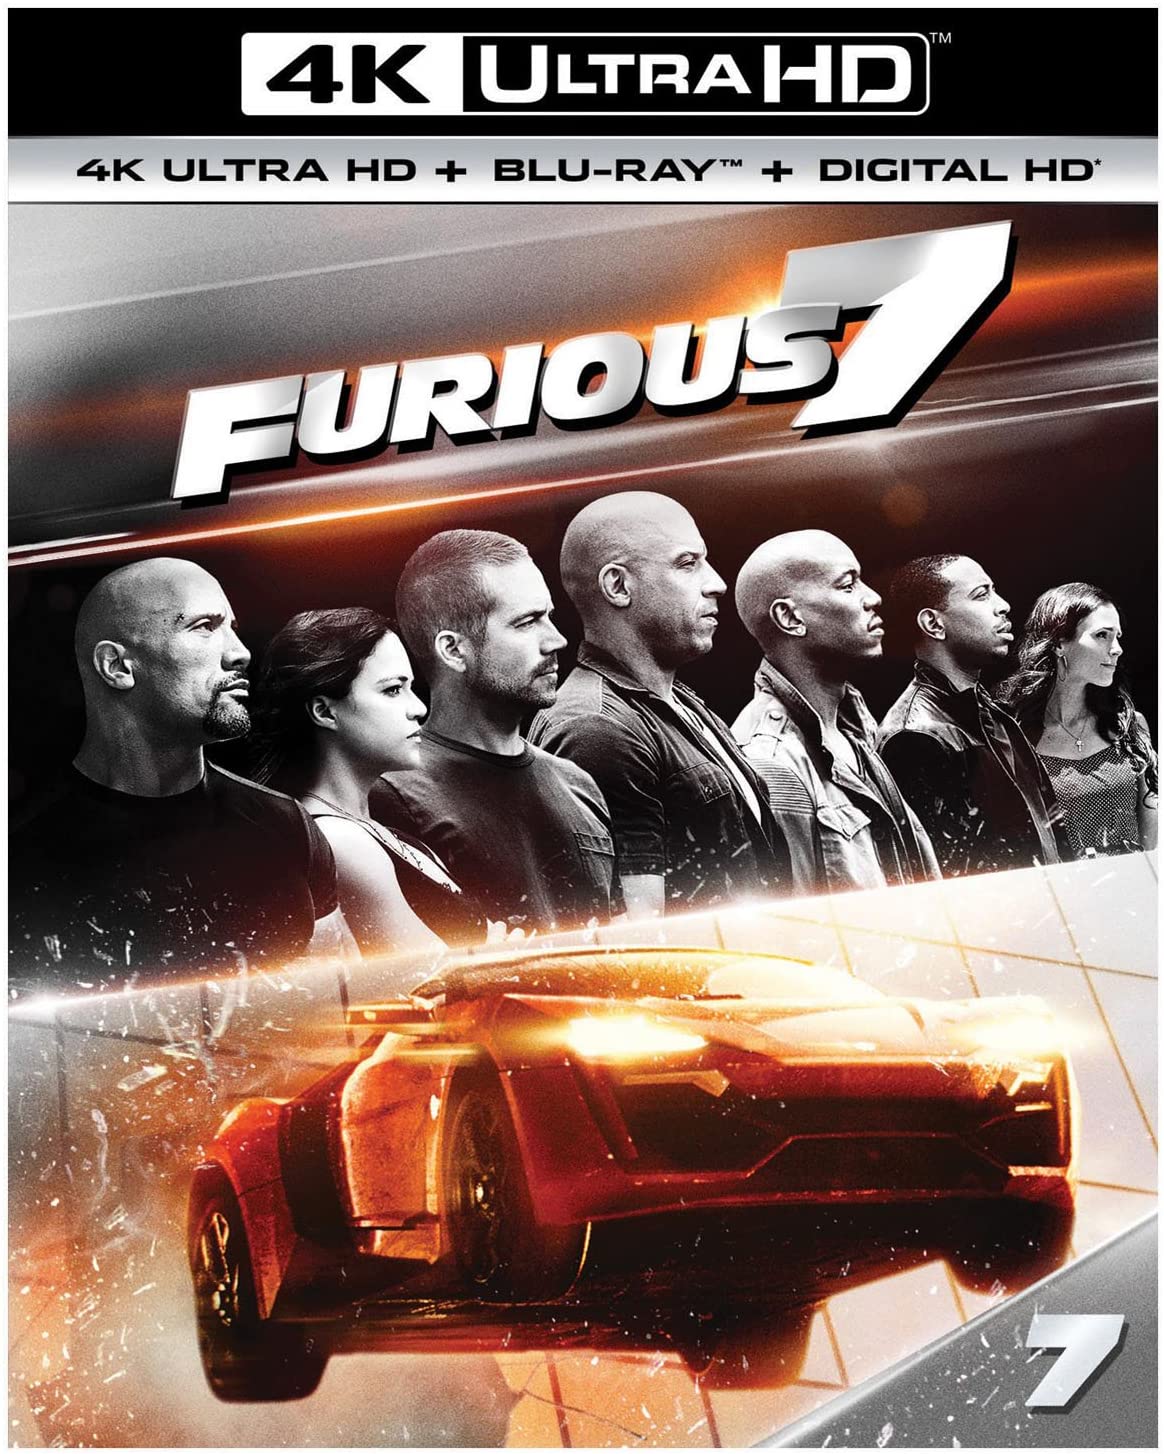 Furious 7 [Extended Edition] (2015: Ports Via MA) iTunes 4K redemption only